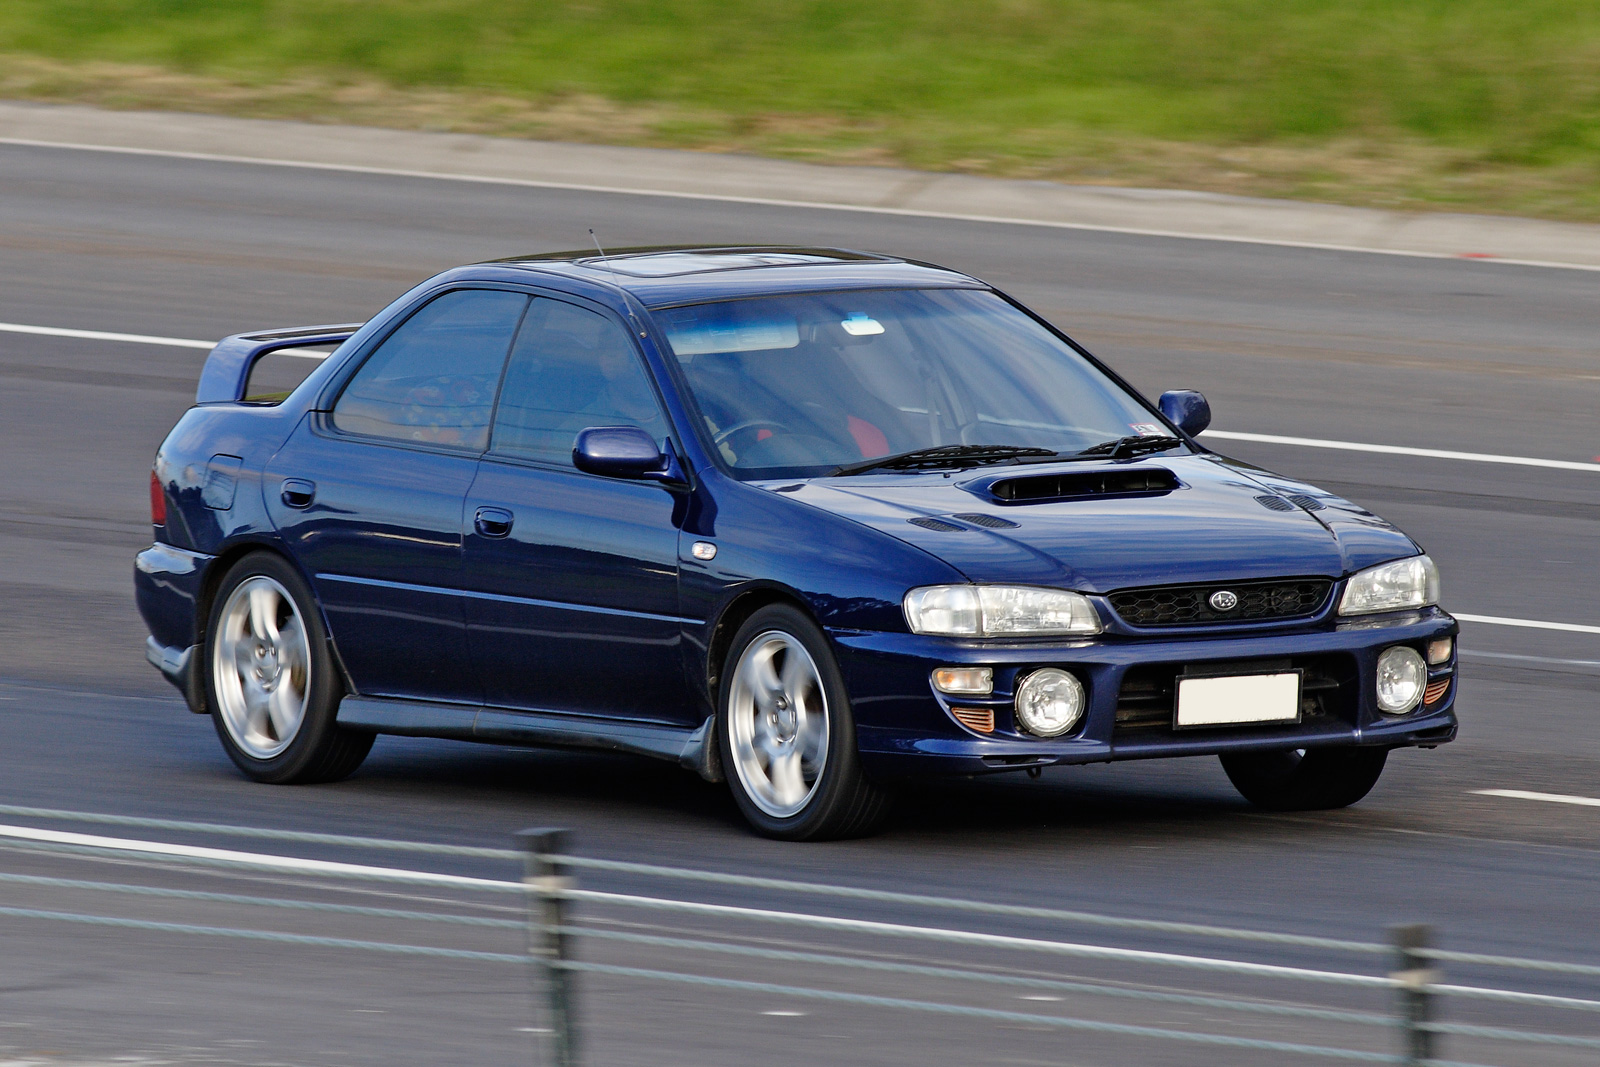 Subaru Impreza 1990: Review, Amazing Pictures and Images – Look at the car